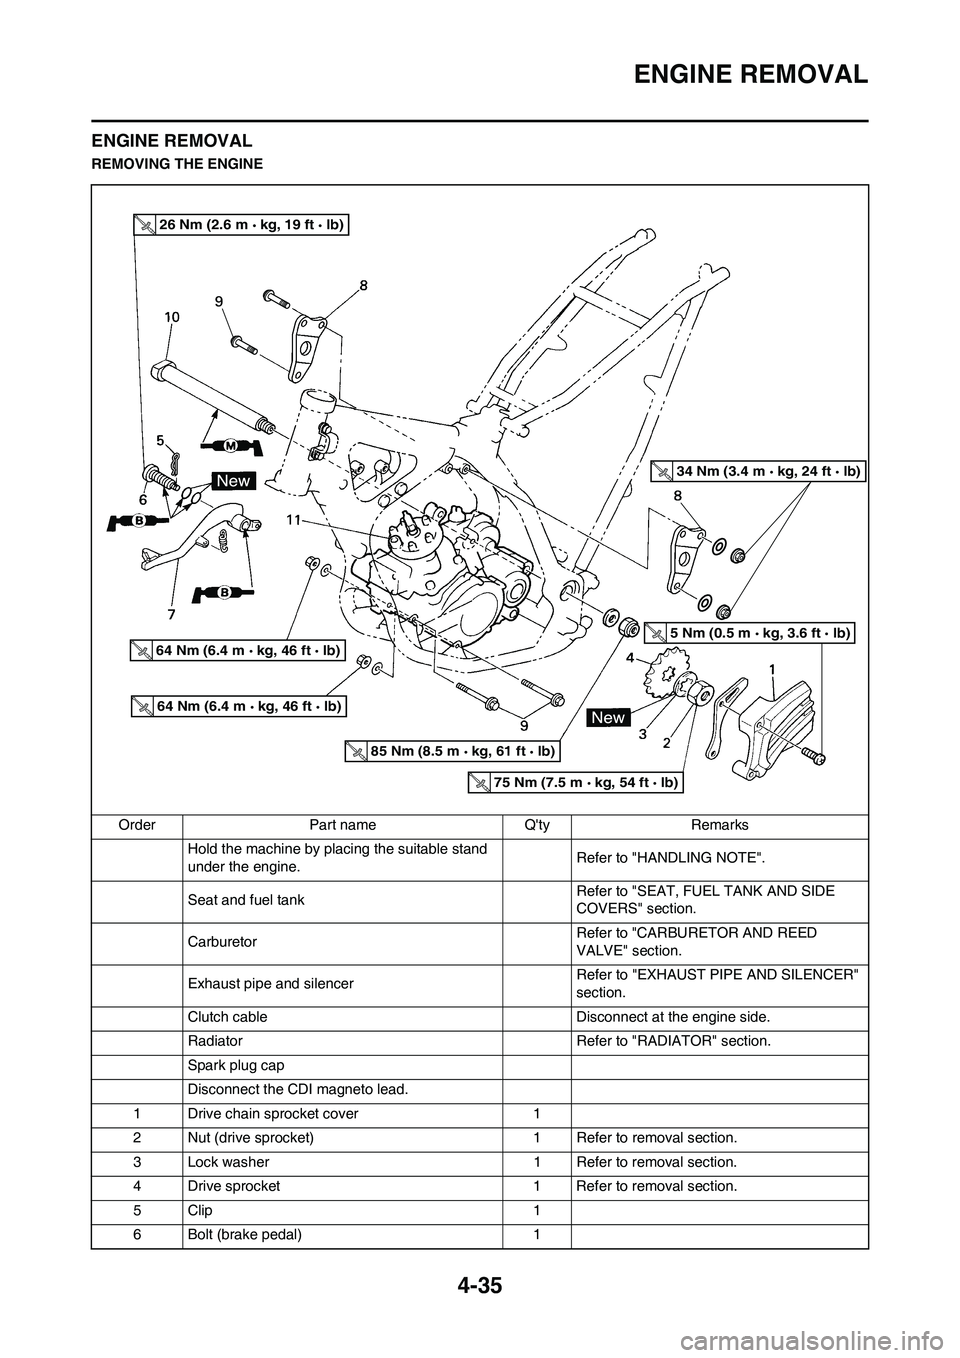 YAMAHA YZ125LC 2010 Owners Guide 4-35
ENGINE REMOVAL
ENGINE REMOVAL
REMOVING THE ENGINE
Order Part name Qty Remarks
Hold the machine by placing the suitable stand 
under the engine.Refer to "HANDLING NOTE".
Seat and fuel tank Refer 